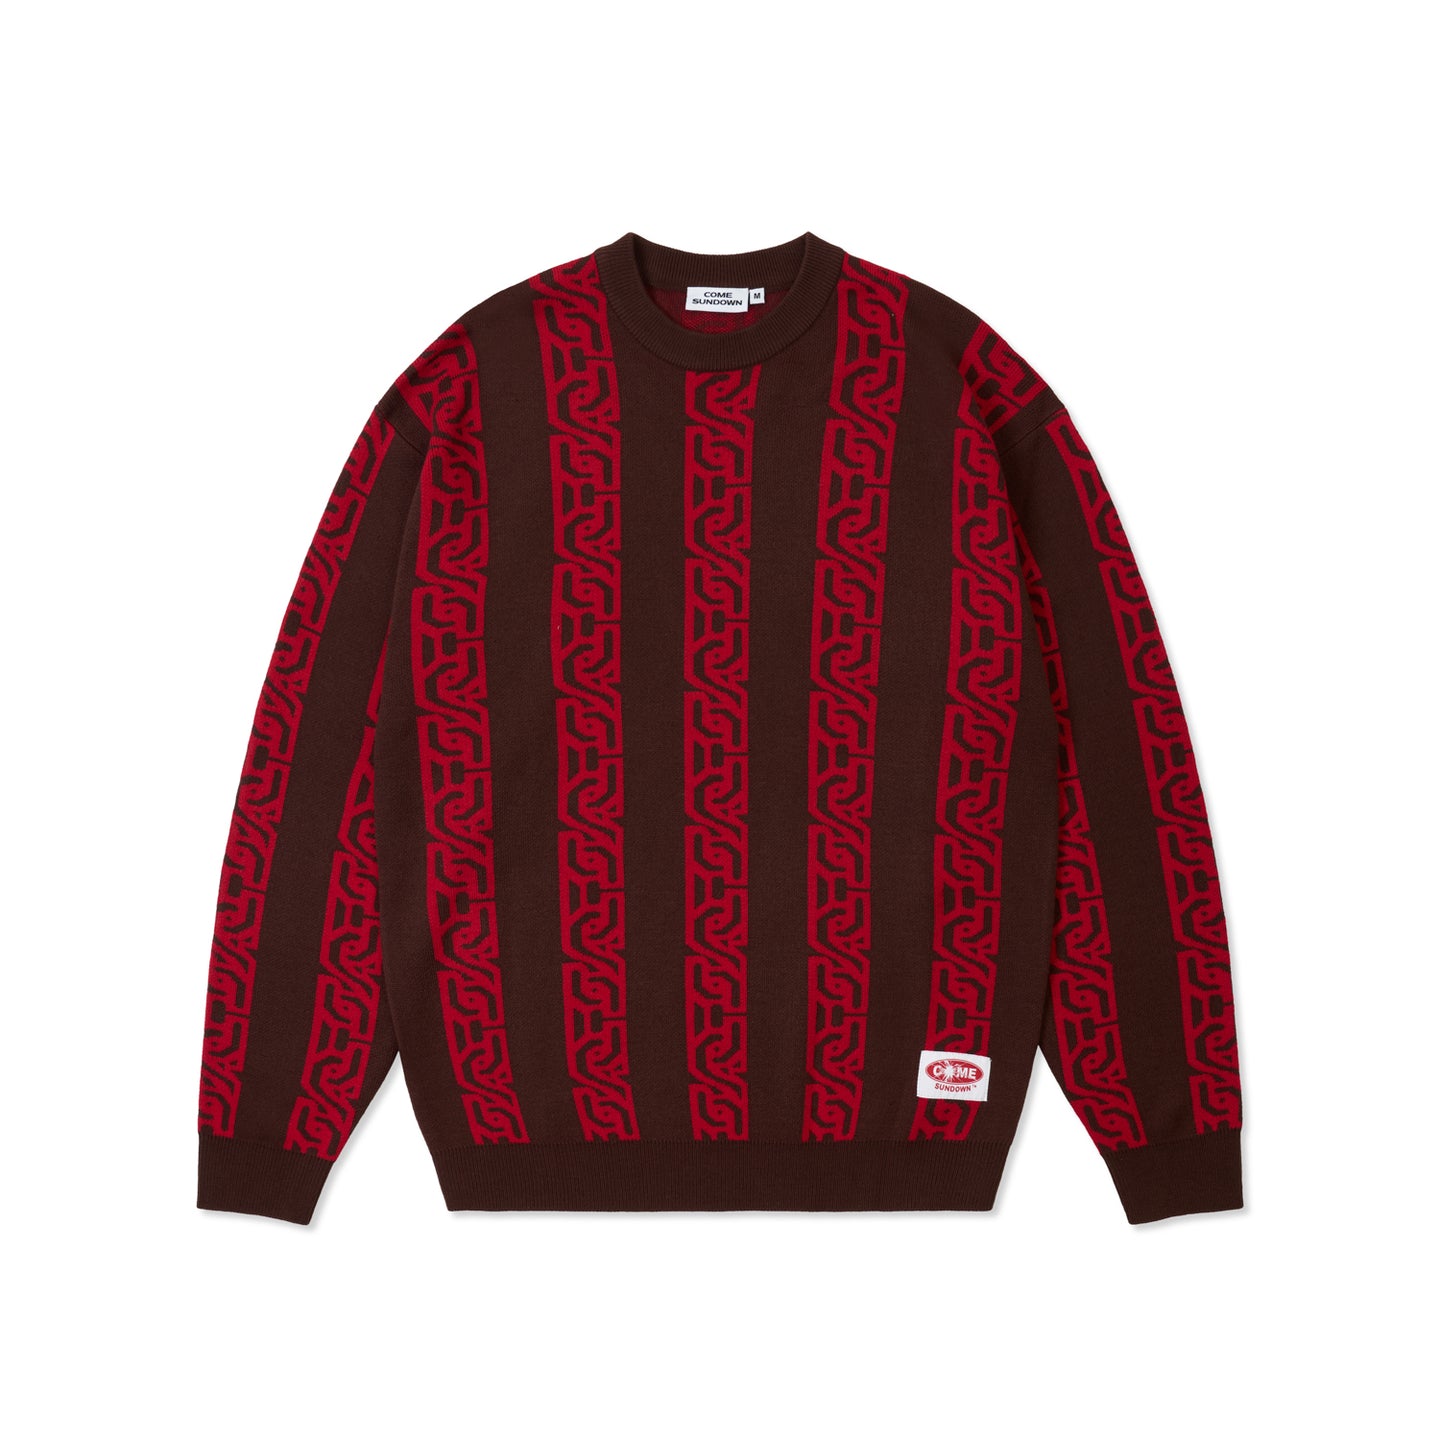 THE KEY SWEATER BROWN